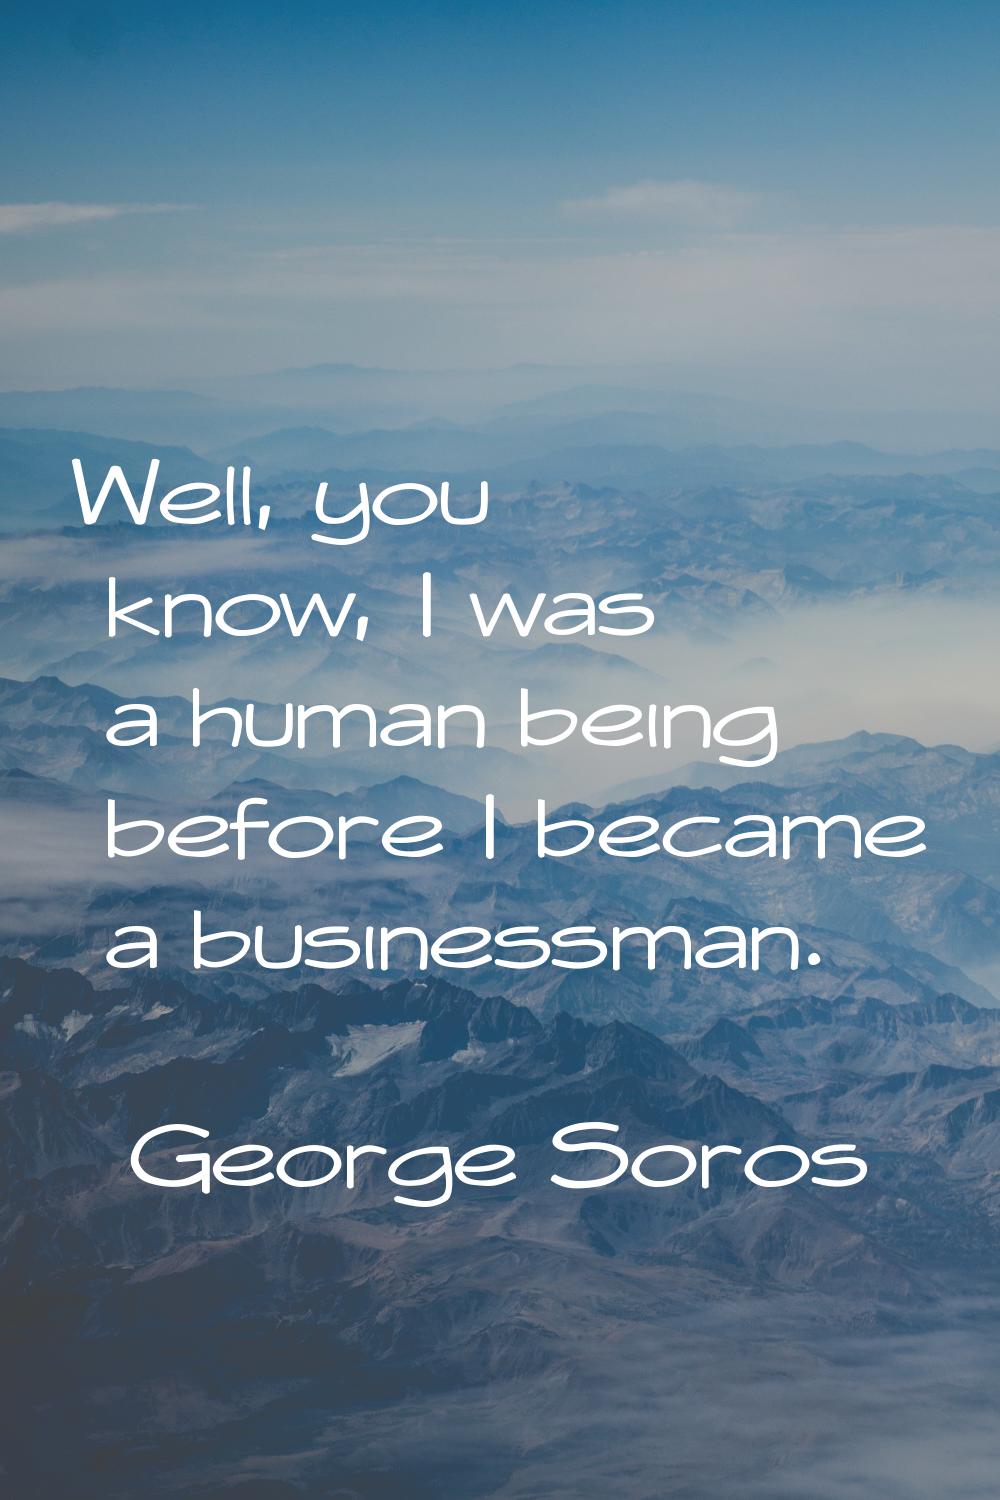 Well, you know, I was a human being before I became a businessman.